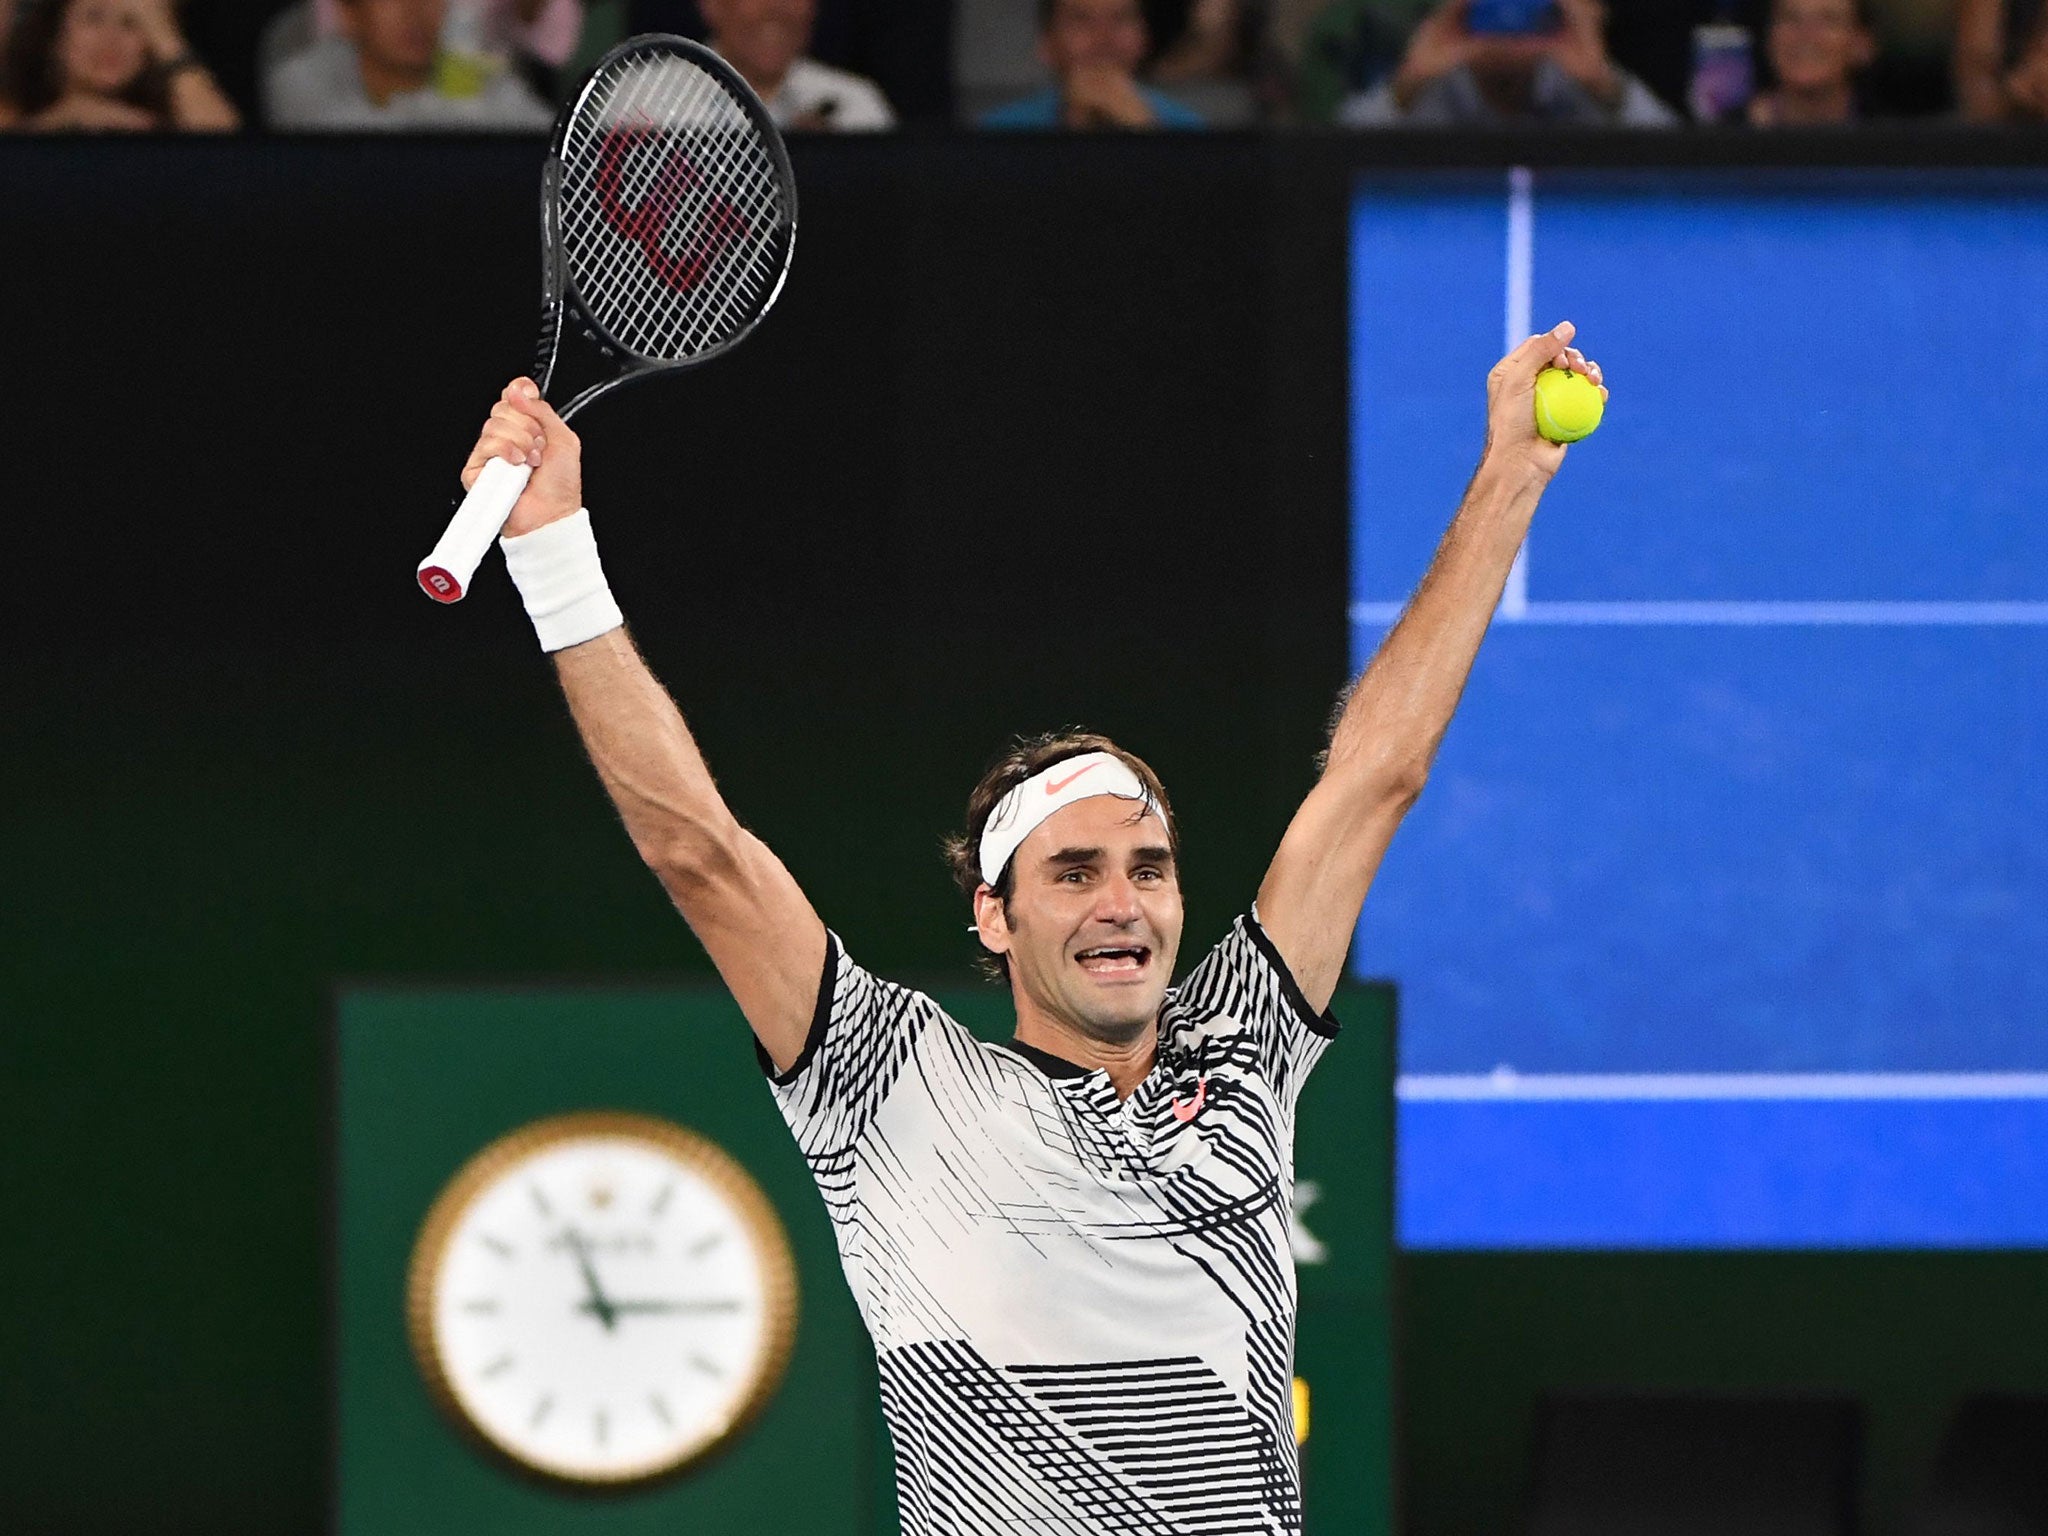 Federer beats Rafael Nadal in thriller to win Australian Open and claim 18th Grand Slam title | The Independent | The Independent